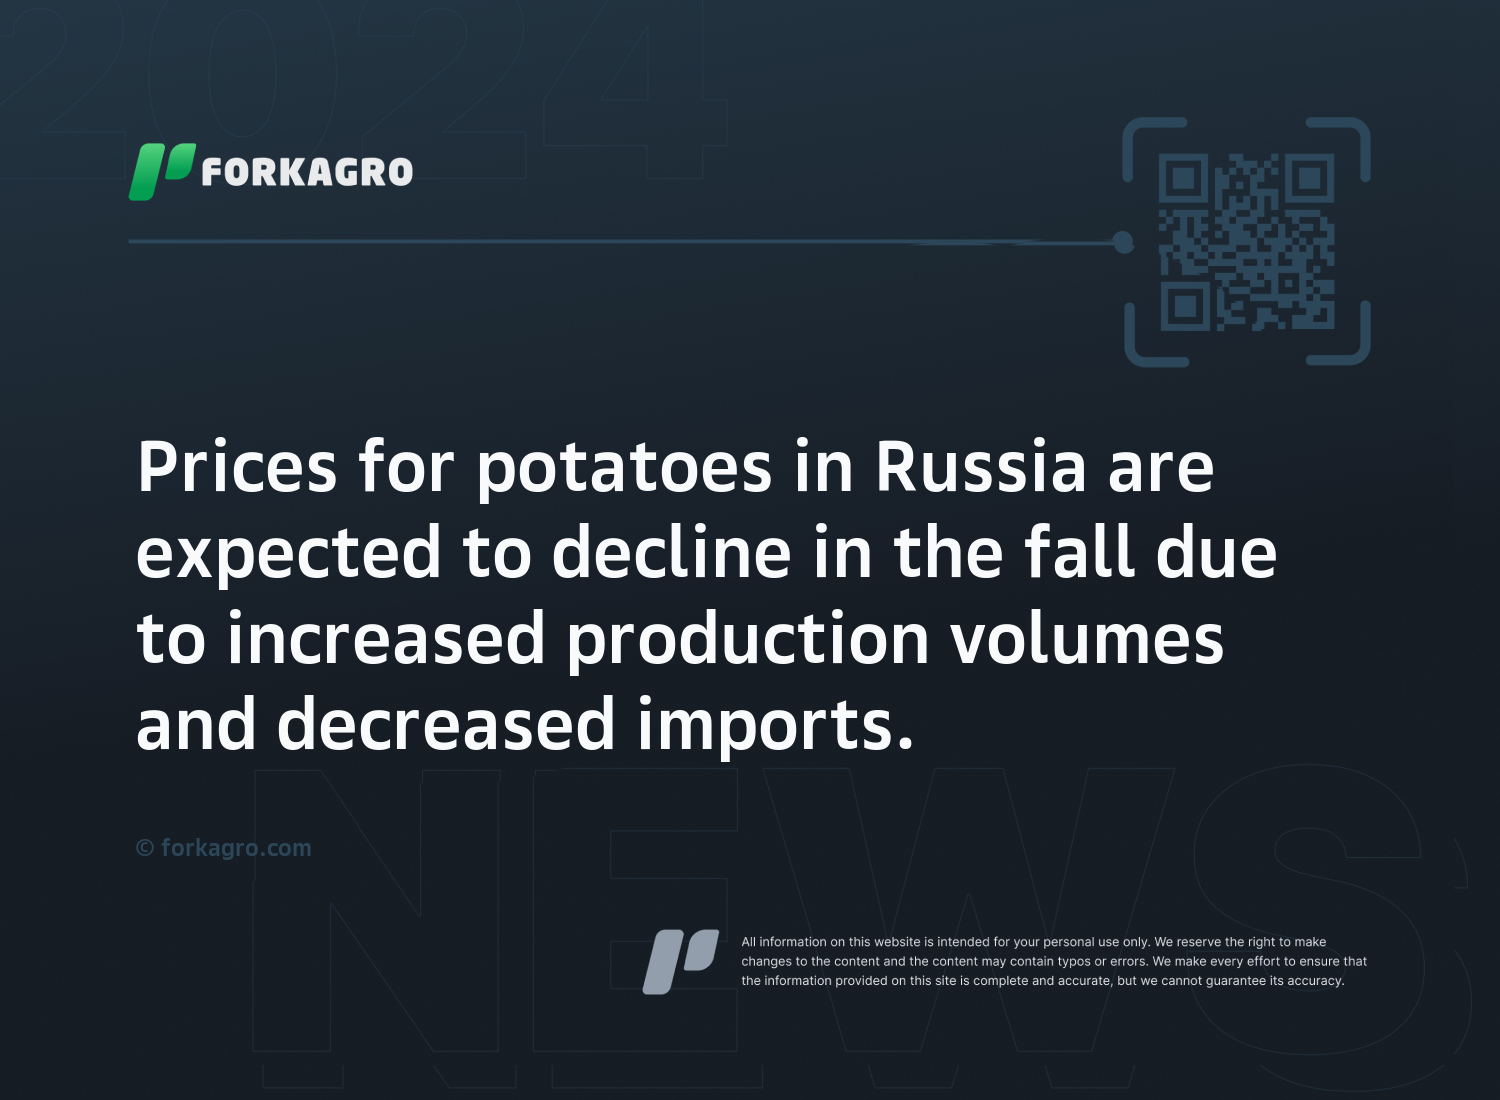 Prices for potatoes in Russia are expected to decline in the fall due to increased production volumes and decreased imports.